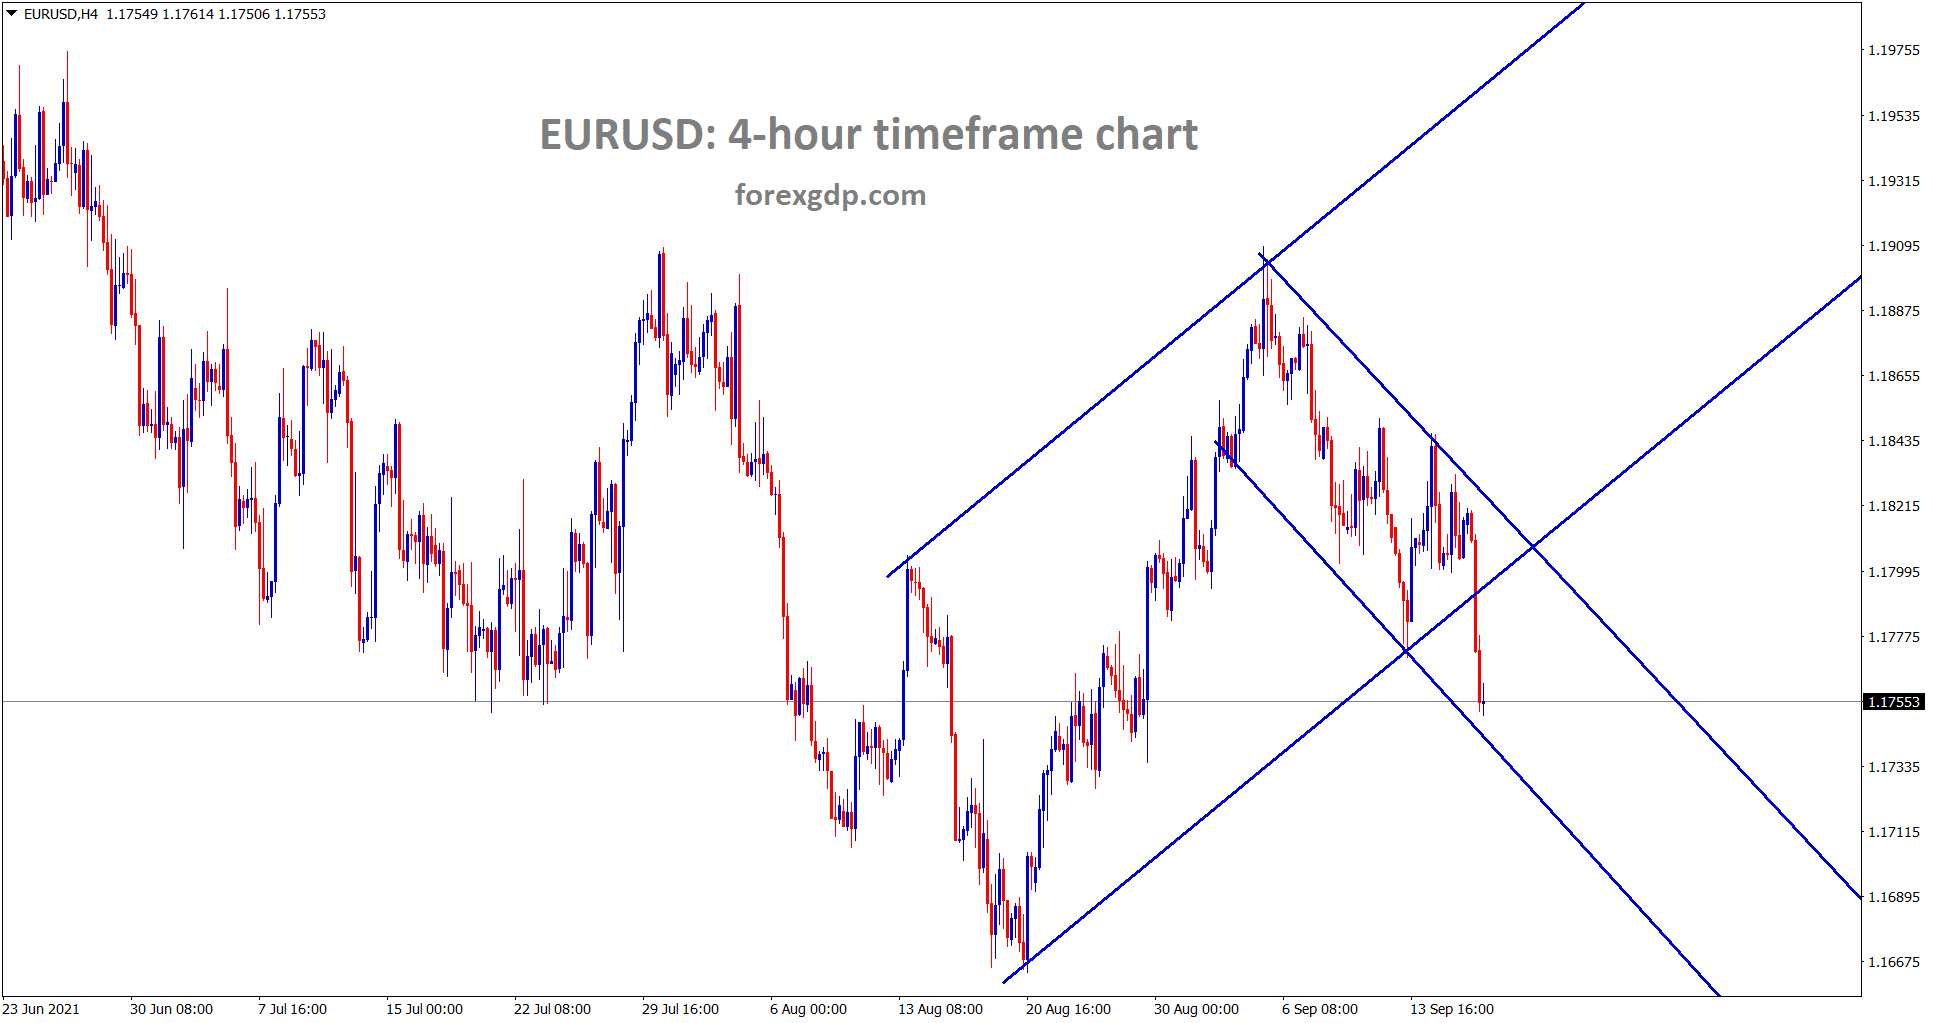 EURUSD is moving between the channel ranges 1